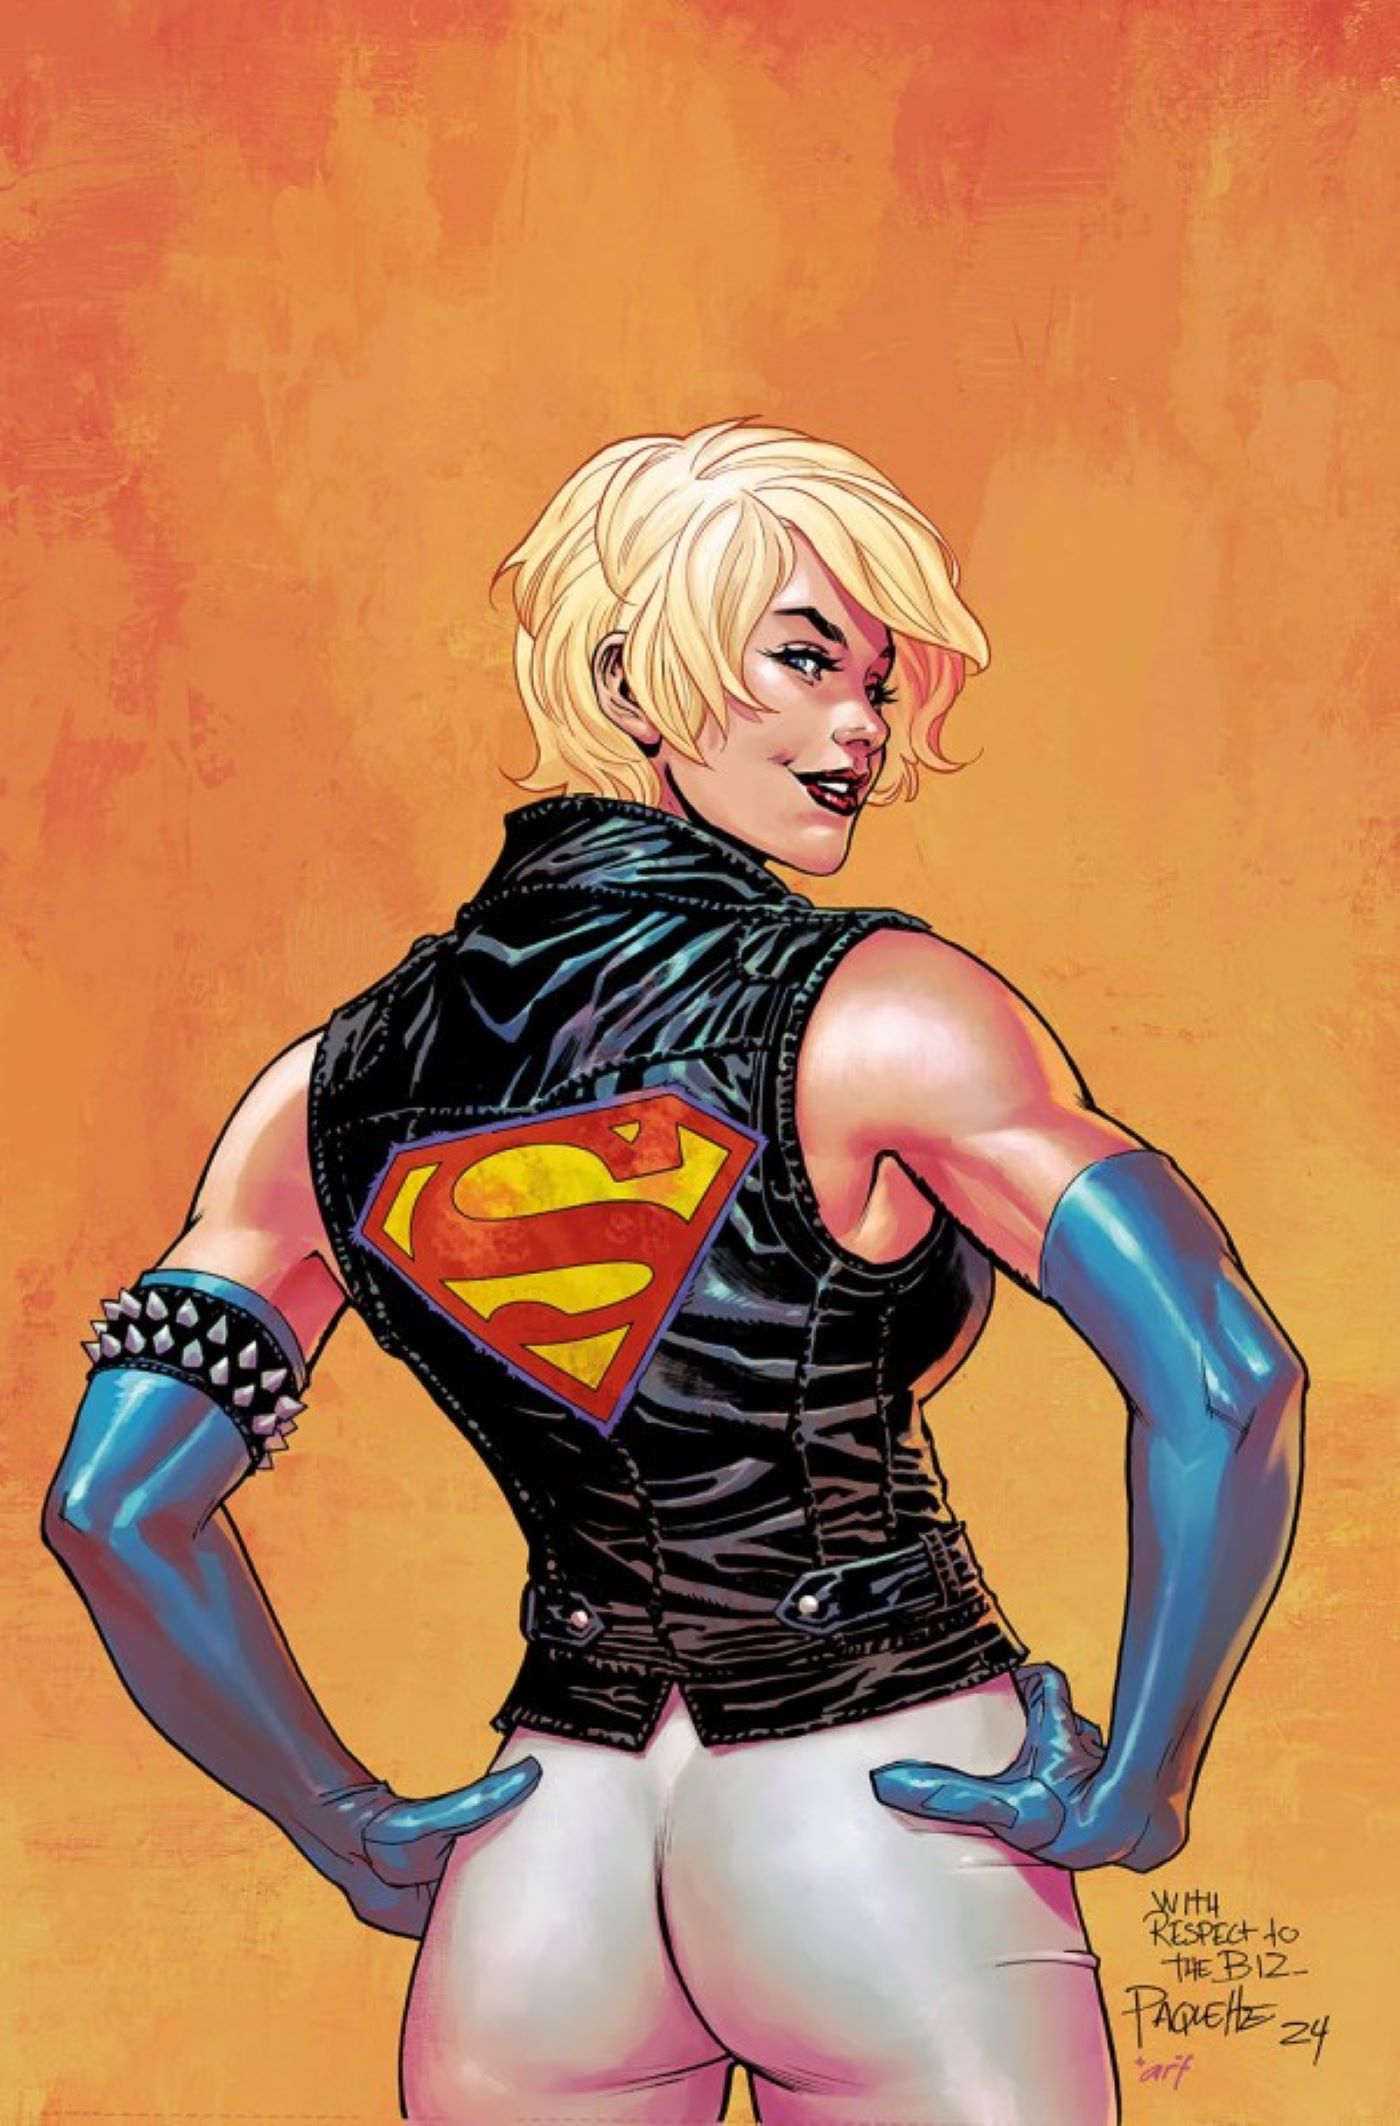 Power Girl #9 wearing a Lobo inspired costume that features the superman creat